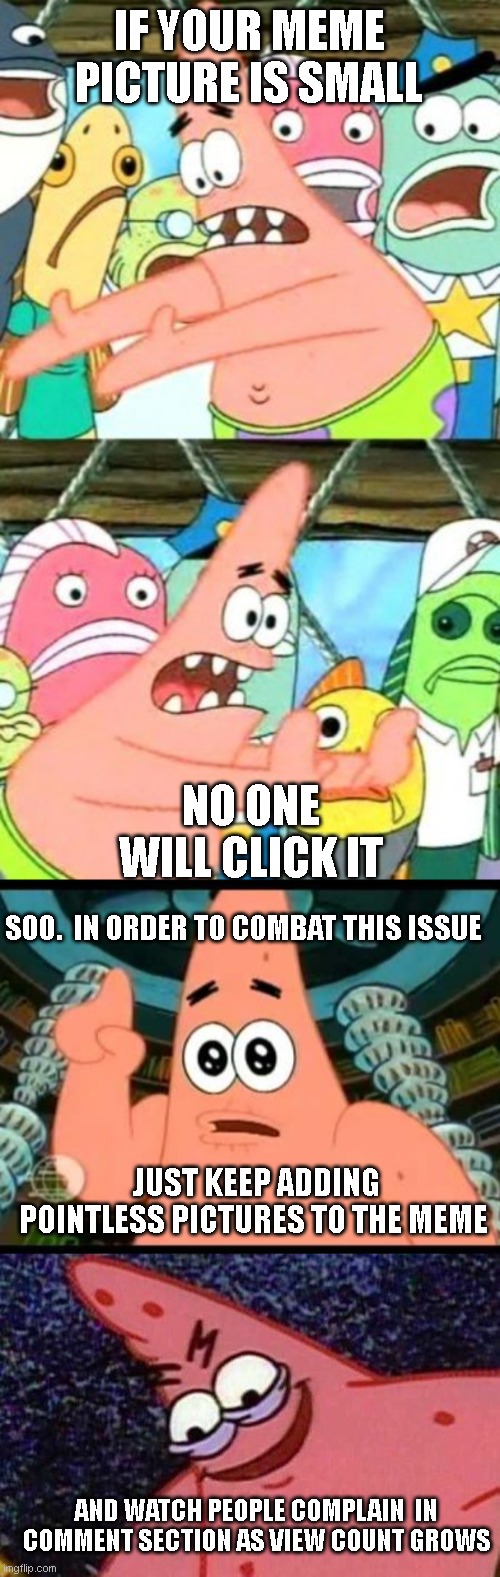 Who needs upvotes | IF YOUR MEME PICTURE IS SMALL; NO ONE WILL CLICK IT; SOO.  IN ORDER TO COMBAT THIS ISSUE; JUST KEEP ADDING POINTLESS PICTURES TO THE MEME; AND WATCH PEOPLE COMPLAIN  IN COMMENT SECTION AS VIEW COUNT GROWS | image tagged in memes,put it somewhere else patrick,patrick says,evil patrick | made w/ Imgflip meme maker